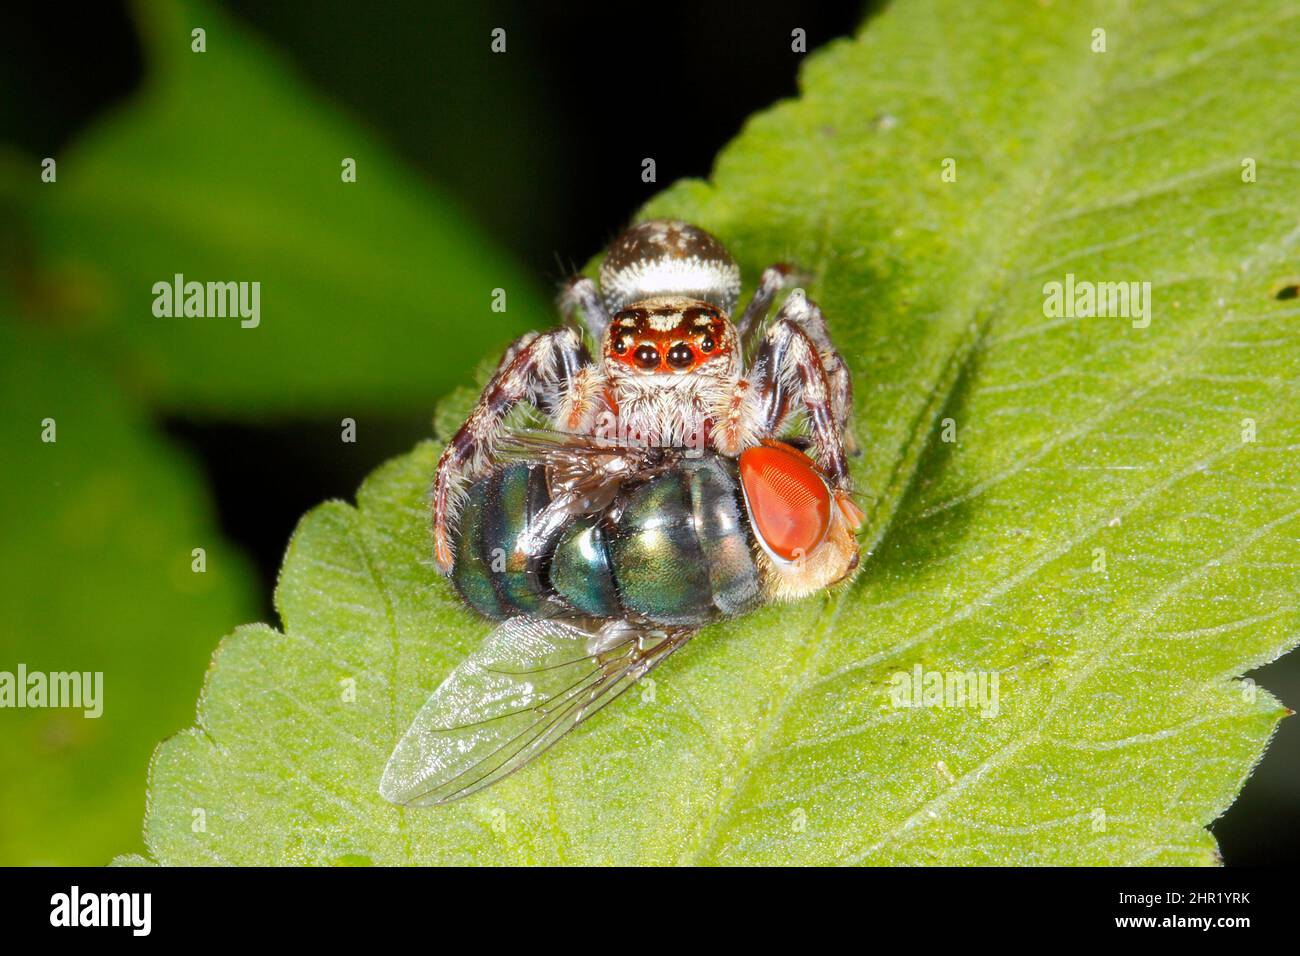 Garden Jumping Spider, Opisthoncus parcedentatus. Holding prey of an Australian Blowfly, probably a Large Greenbottle, Chrysomya rufifacies or Steelbl Stock Photo